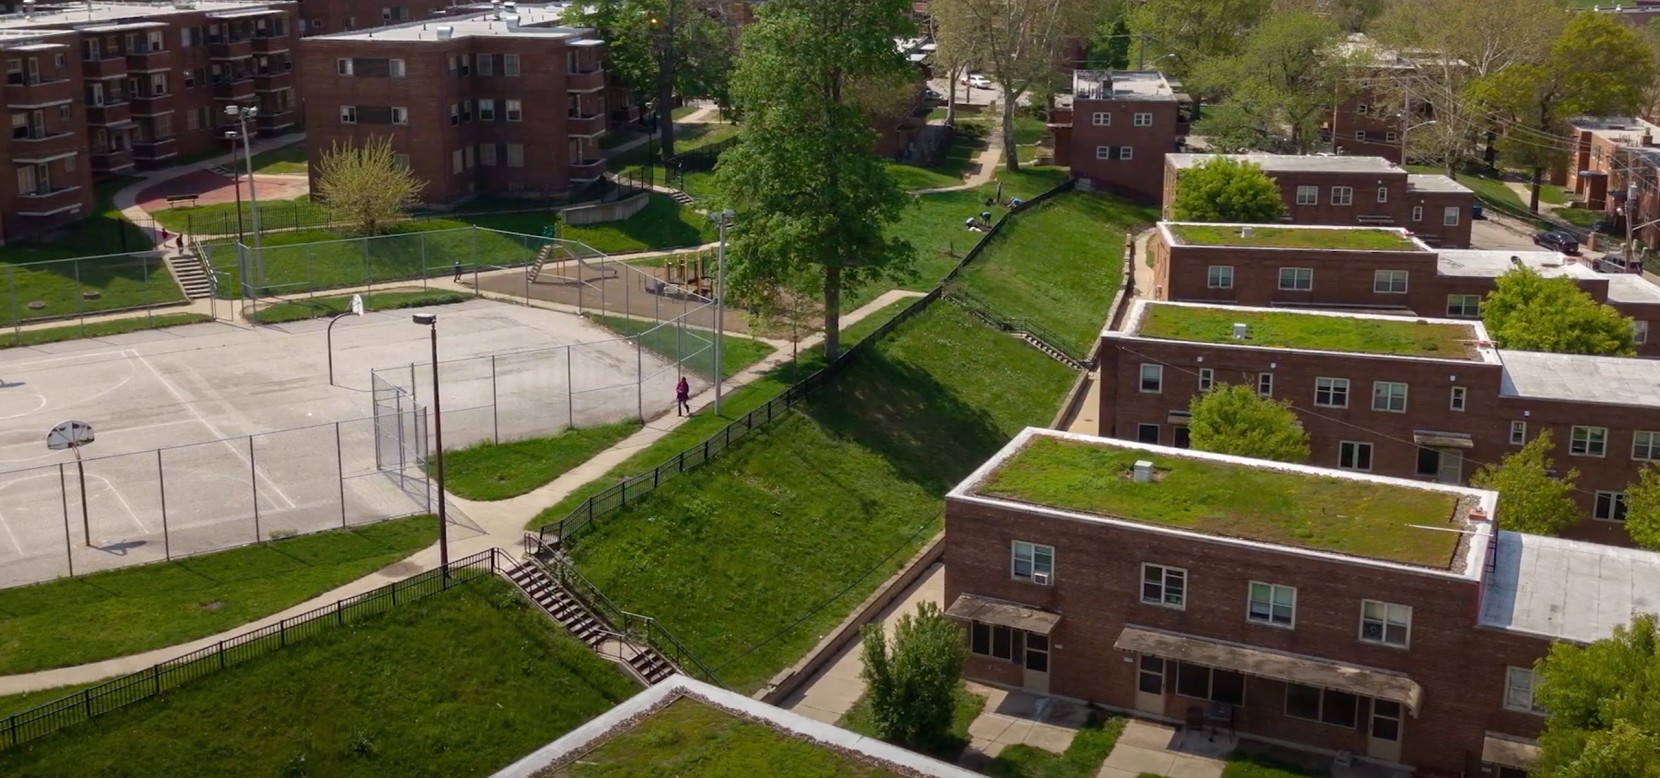 Overhead view of Lakeview Terrace, Cleveland's oldest housing facility.